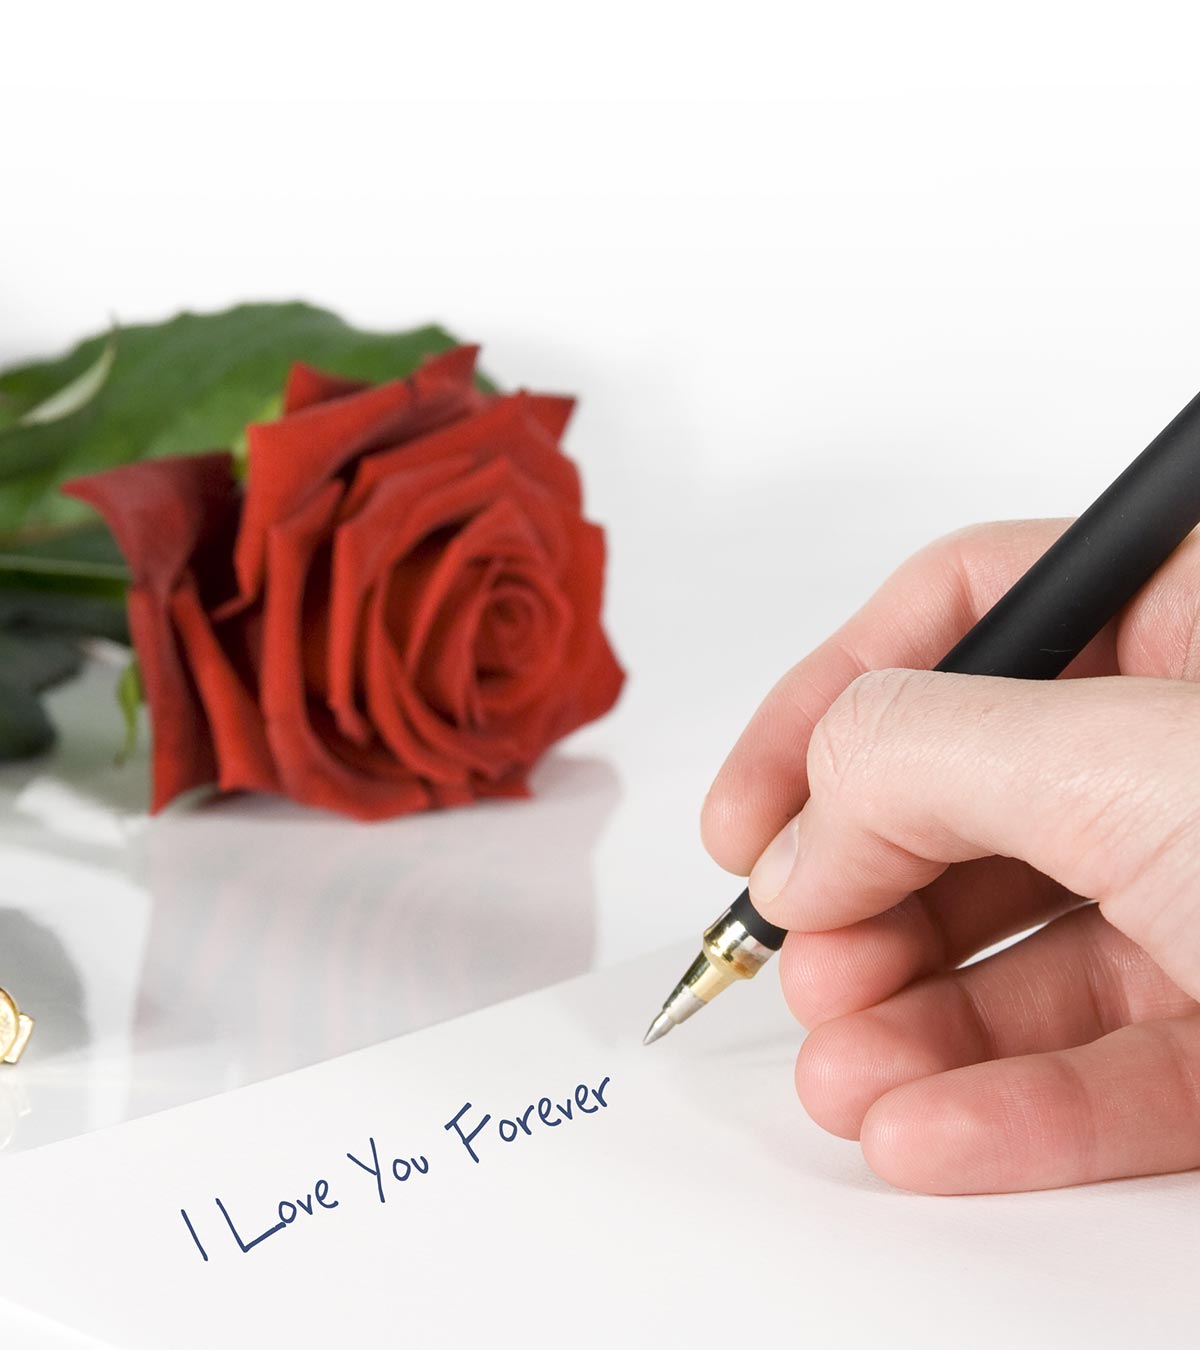 45 Melting Love Letters To The Wife